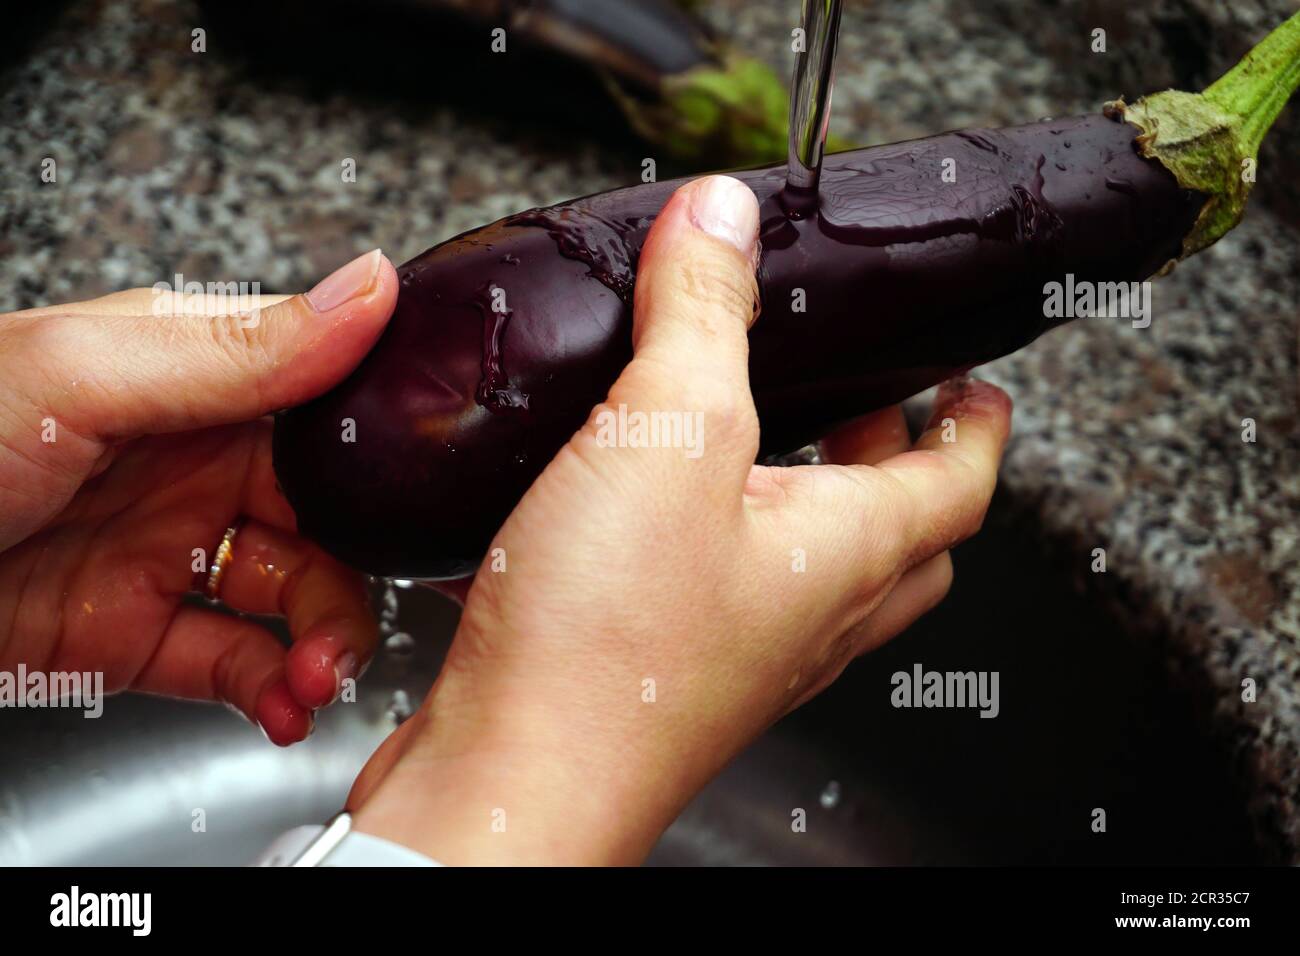 Woman washing eggplant under the faucet in the kitchen Stock Photo